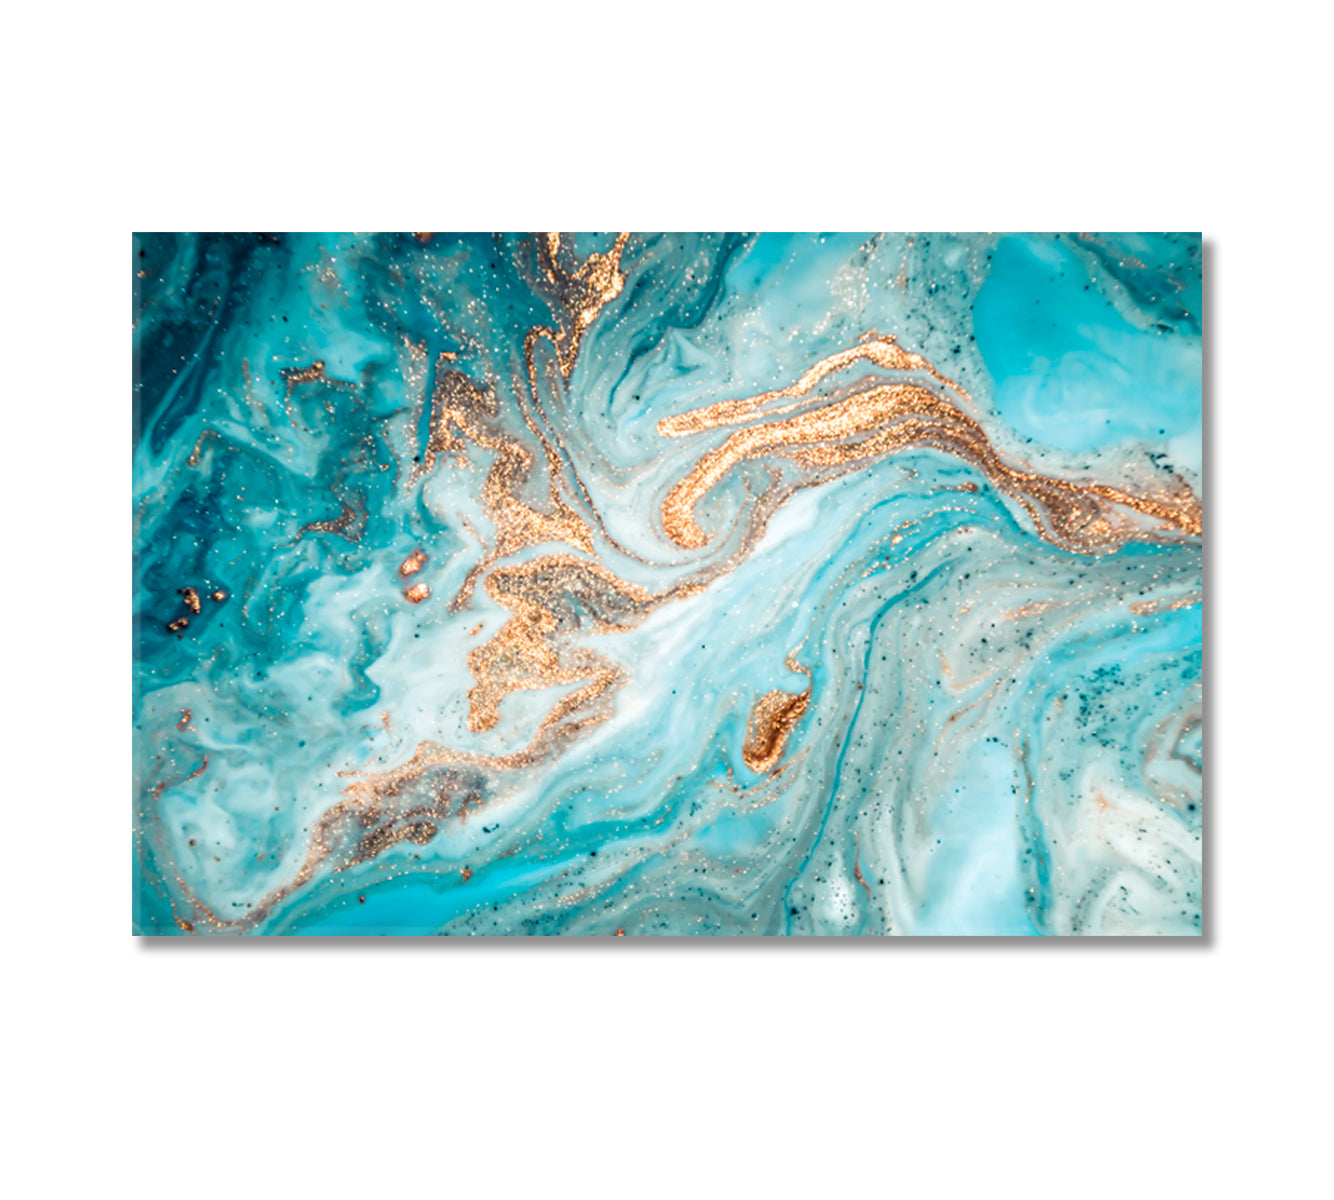 Modern Gold and Turquoise Marble Canvas Print-Canvas Print-CetArt-1 Panel-24x16 inches-CetArt